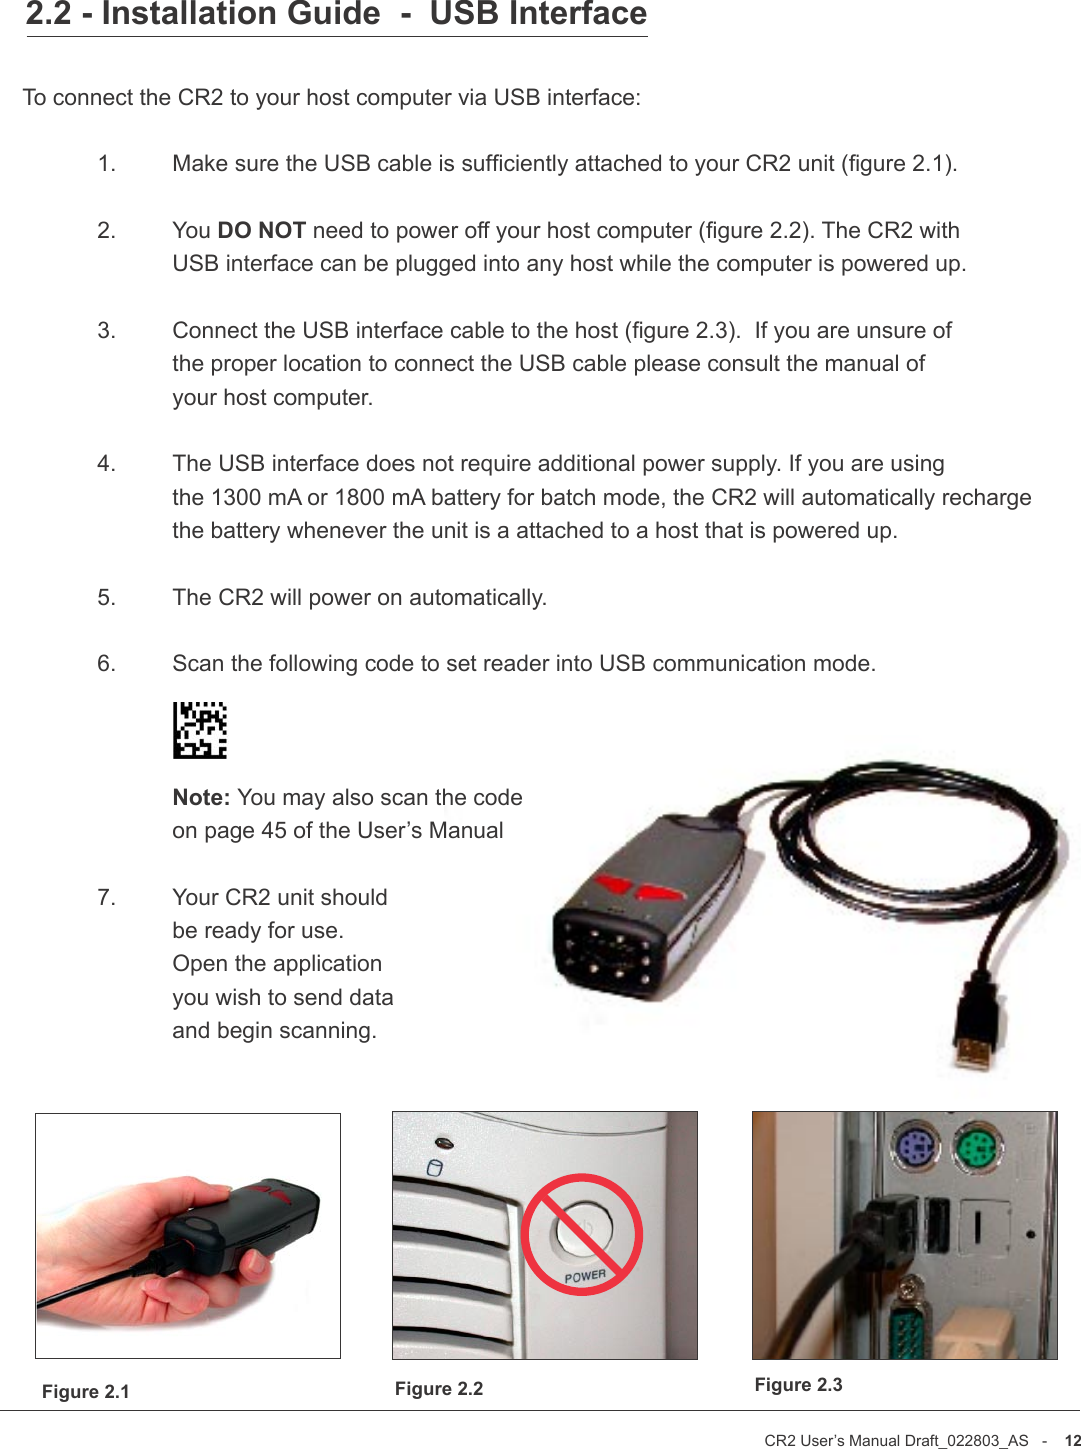 CR2 User’s Manual Draft_022803_AS   -    12CR2 User’s Manual Draft_022803_AS   -    132.2 - Installation Guide  -  USB InterfaceTo connect the CR2 to your host computer via USB interface:           1.   Make sure the USB cable is sufciently attached to your CR2 unit (gure 2.1).  2.   You DO NOT need to power off your host computer (gure 2.2). The CR2 with     USB interface can be plugged into any host while the computer is powered up.  3.   Connect the USB interface cable to the host (gure 2.3).  If you are unsure of     the proper location to connect the USB cable please consult the manual of     your host computer.  4.   The USB interface does not require additional power supply. If you are using     the 1300 mA or 1800 mA battery for batch mode, the CR2 will automatically recharge     the battery whenever the unit is a attached to a host that is powered up.   5.  The CR2 will power on automatically.  6.   Scan the following code to set reader into USB communication mode.    Note: You may also scan the code    on page 45 of the User’s Manual      7.   Your CR2 unit should     be ready for use.     Open the application     you wish to send data     and begin scanning.Figure 2.1 Figure 2.2 Figure 2.3